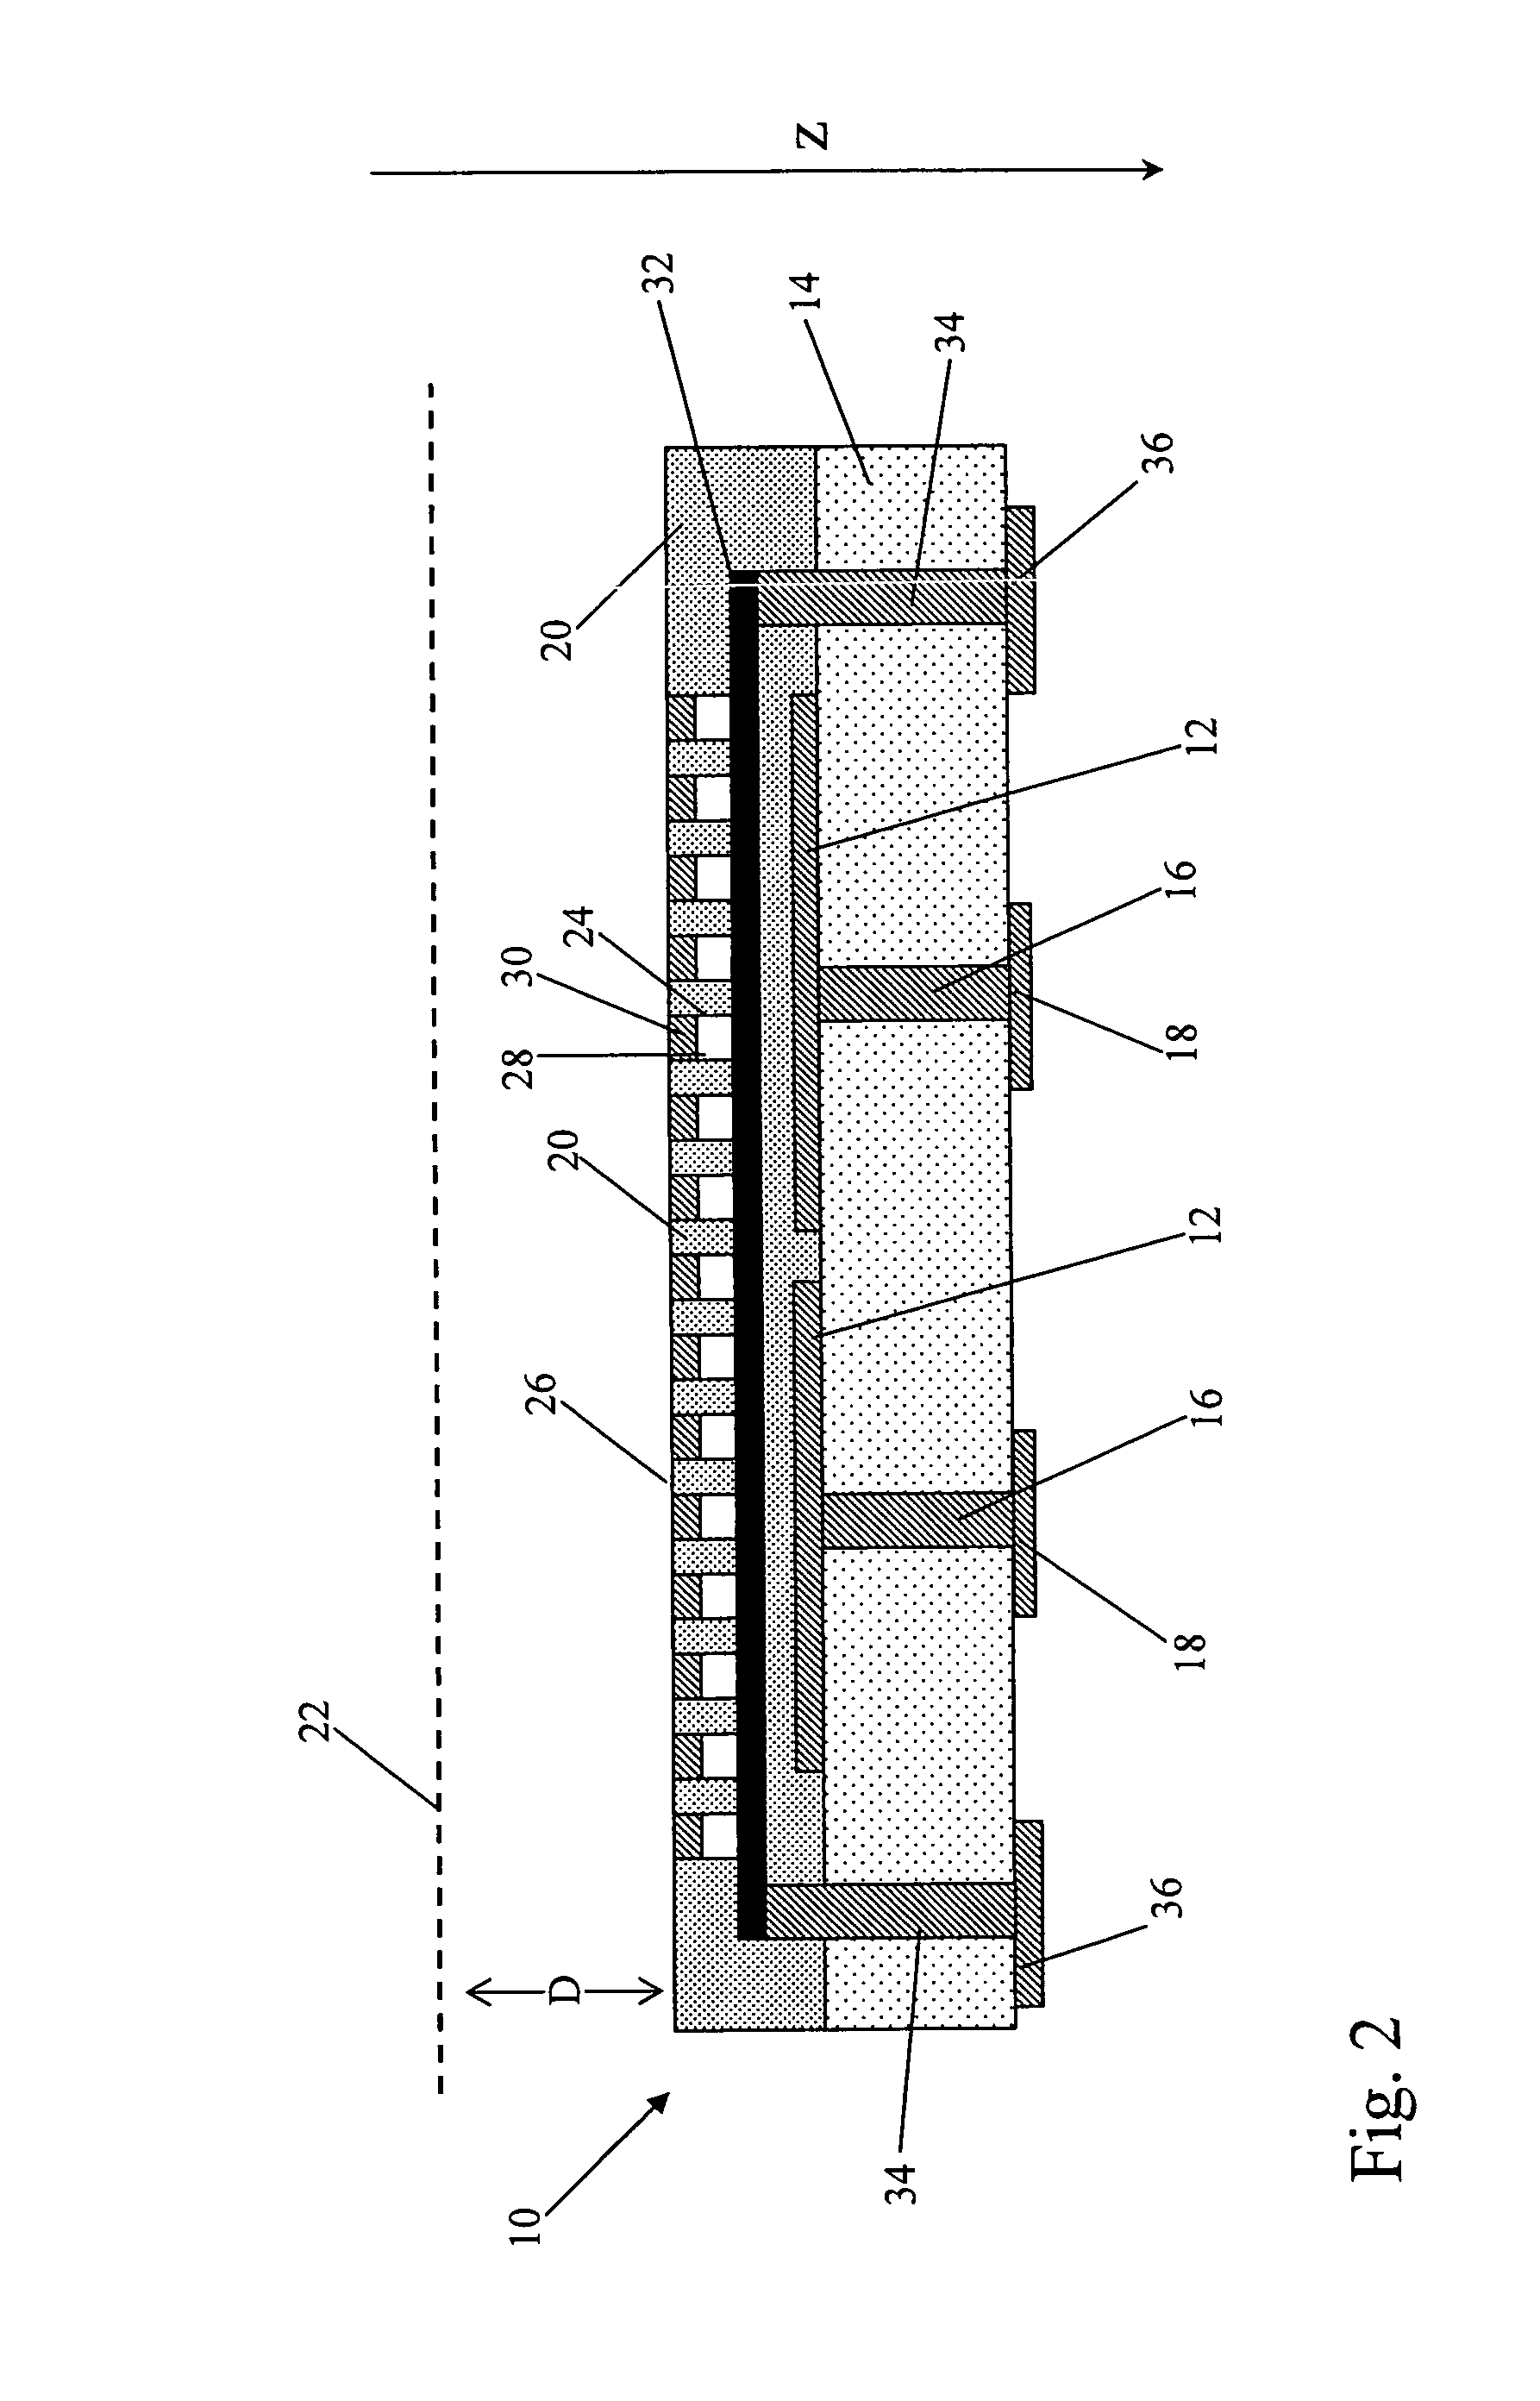 Protected readout electrode assembly